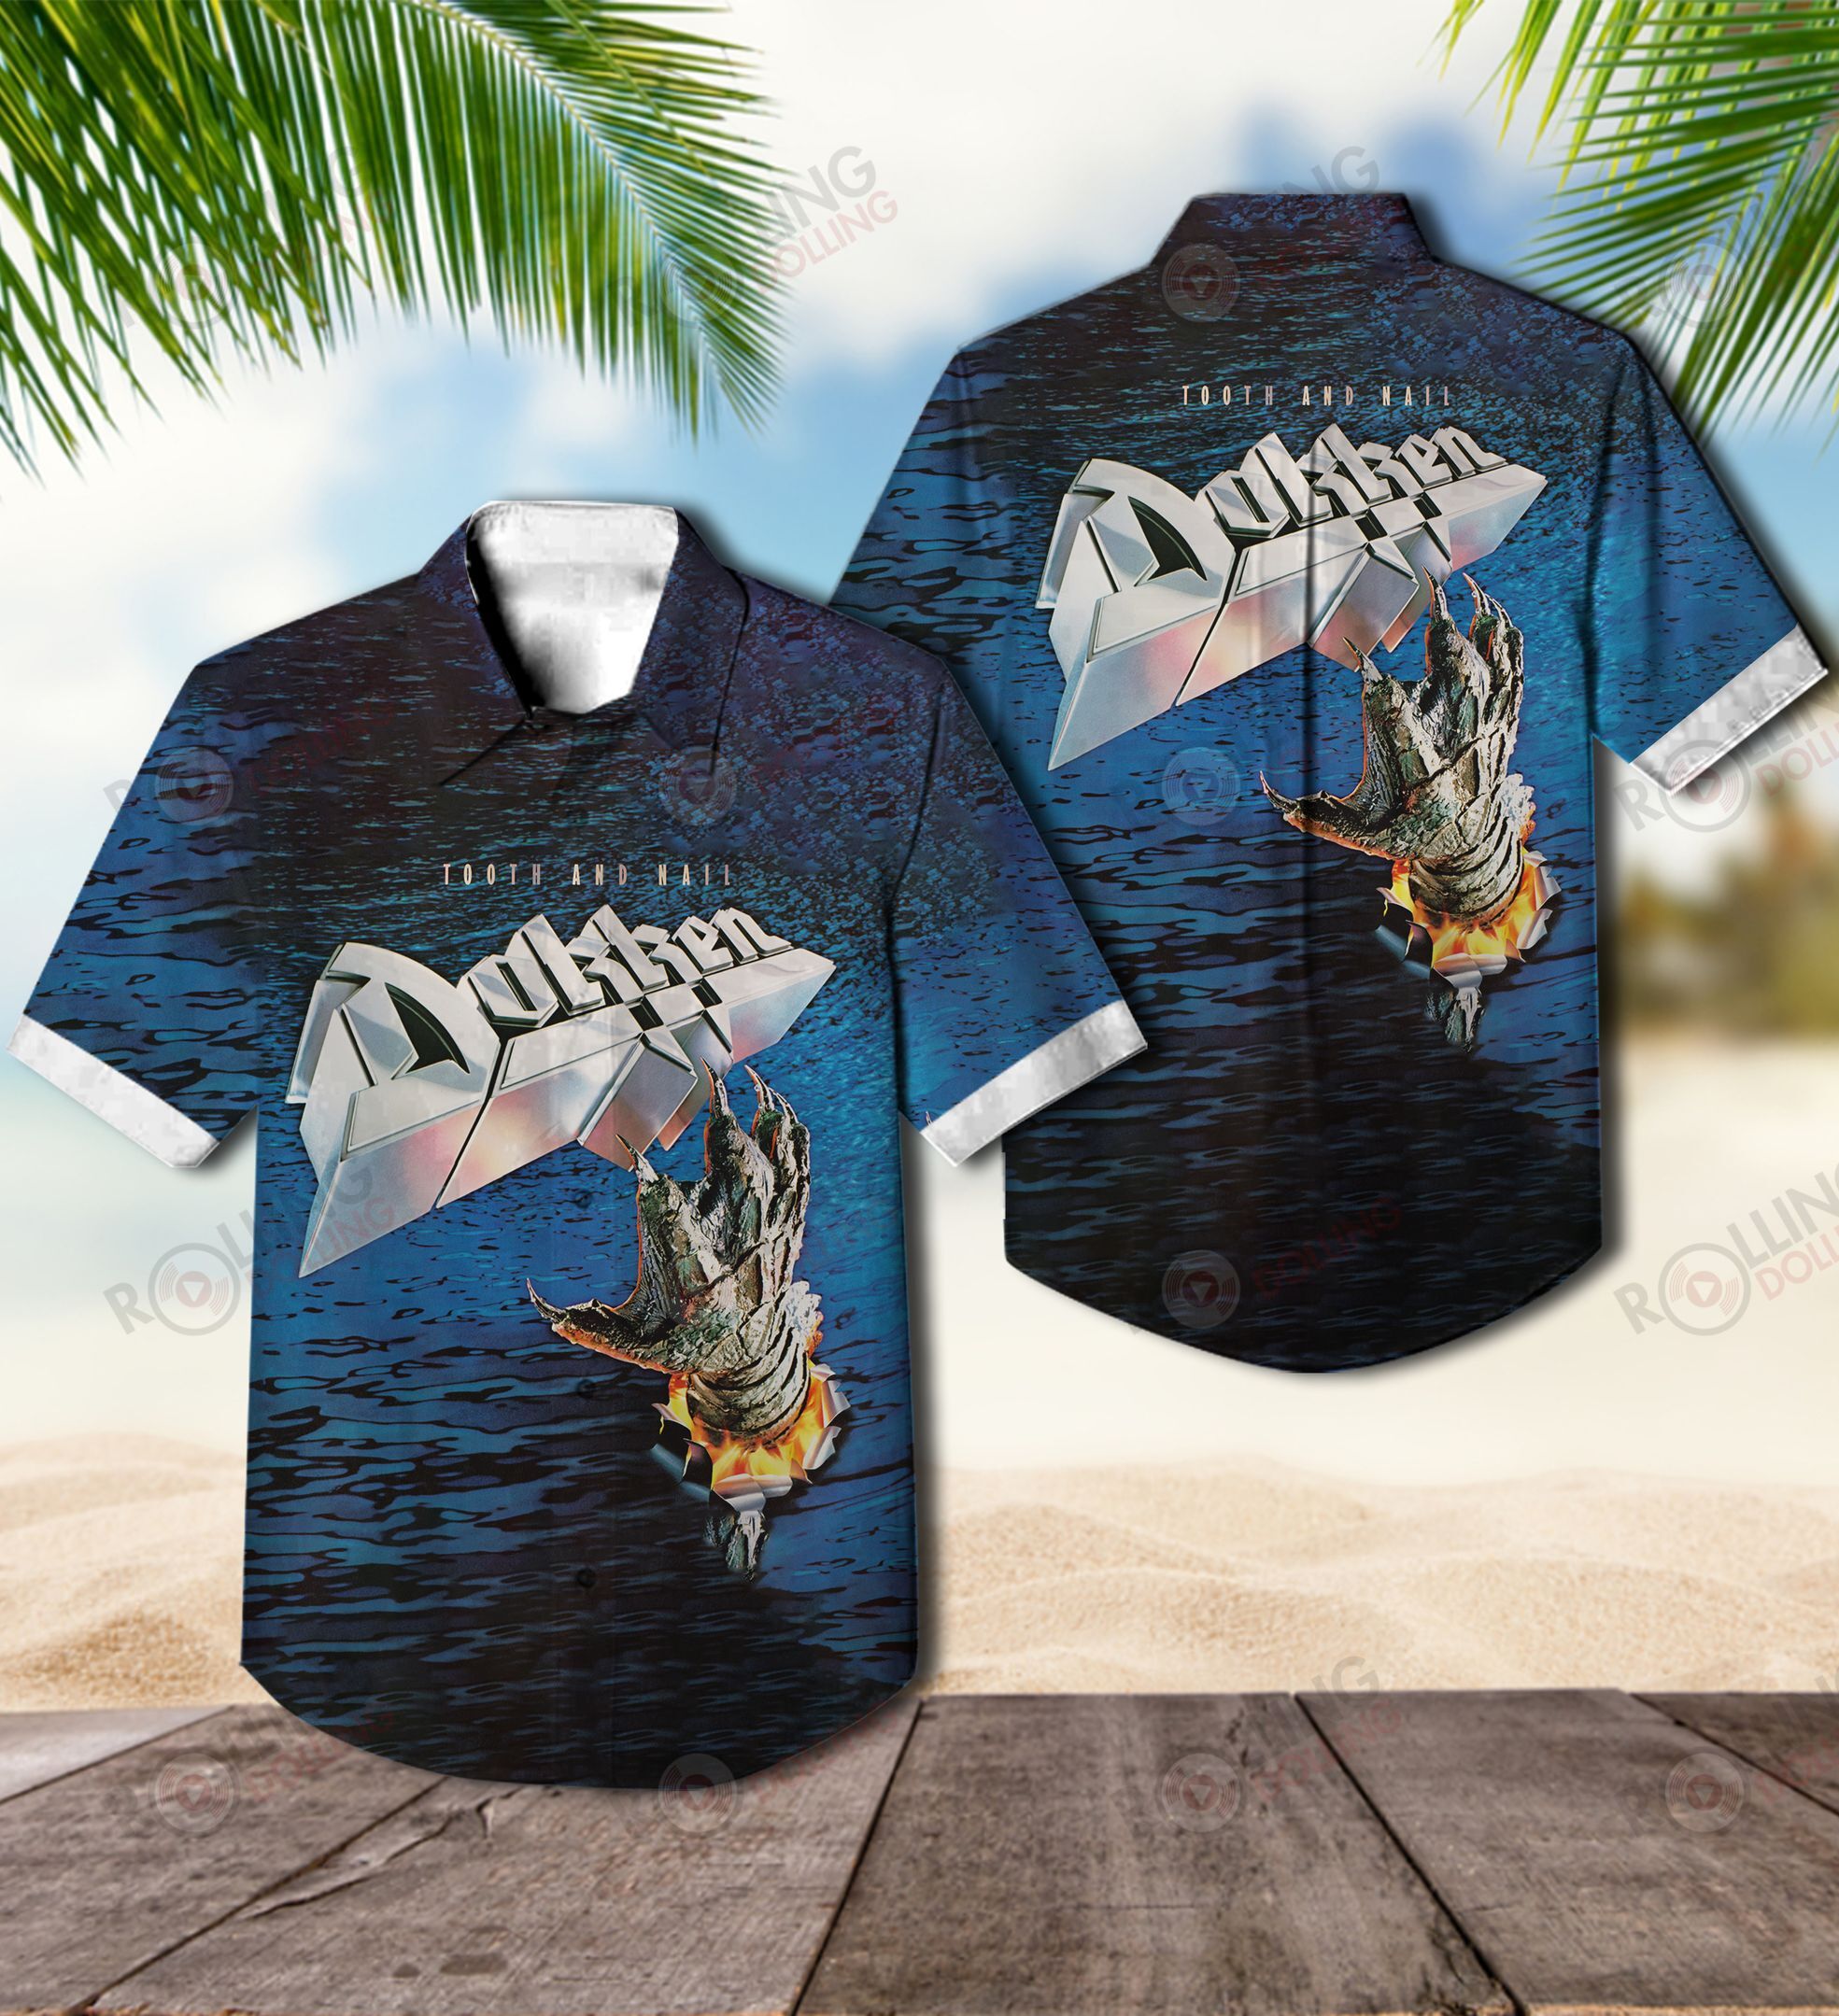 We have compiled a list of some of the best Hawaiian shirt that are available 3